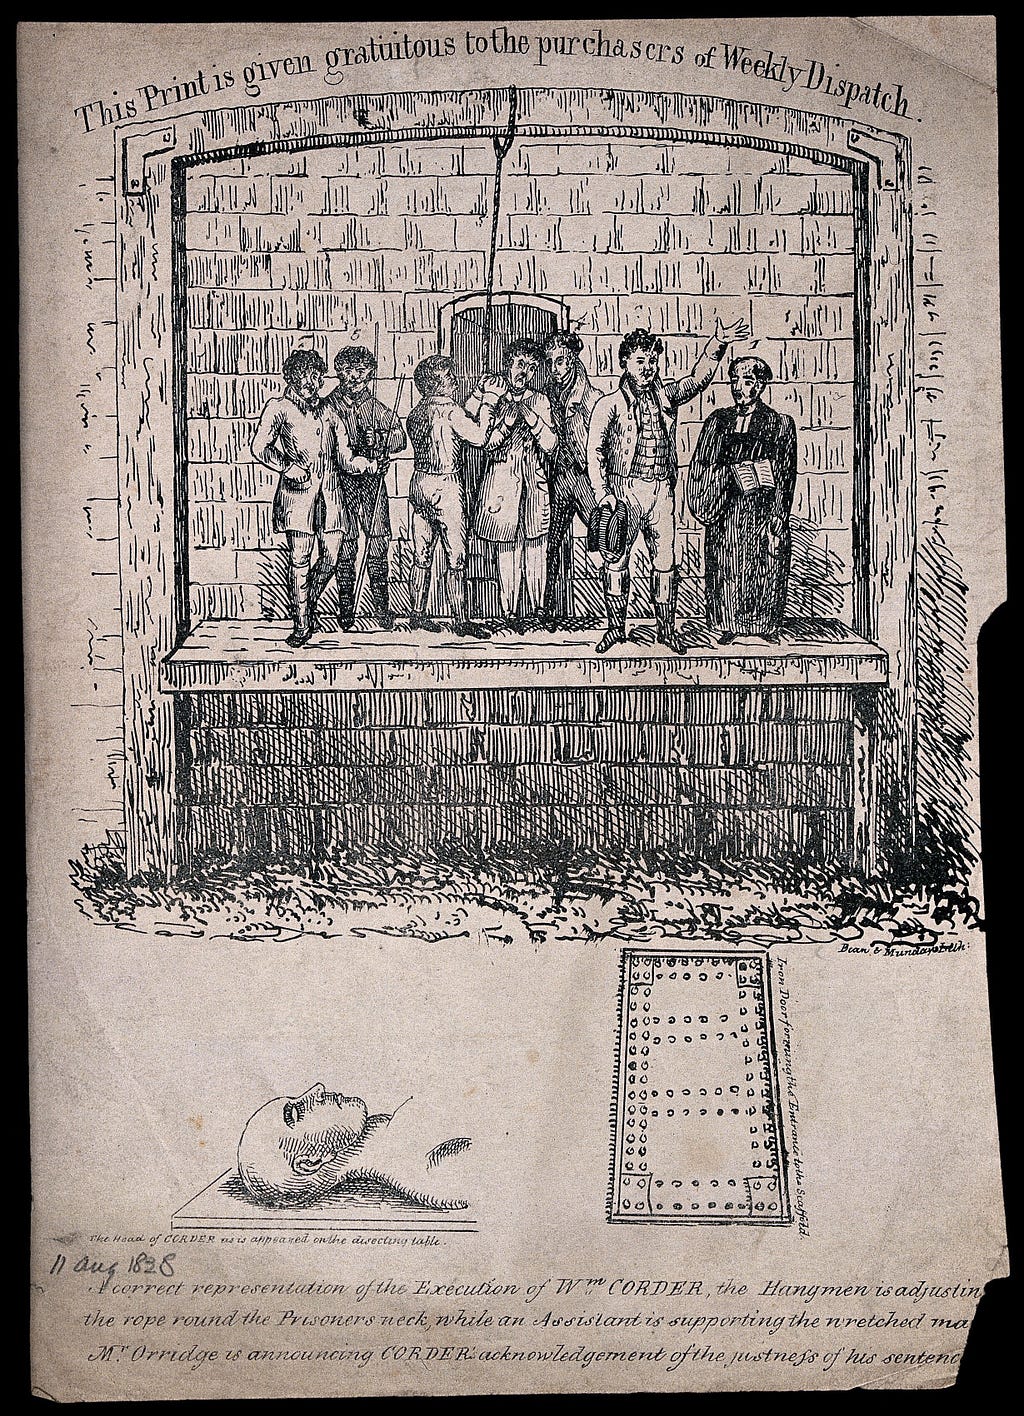 Public Domain image. An old ink drawing depicting “The Execution of William Corder.”